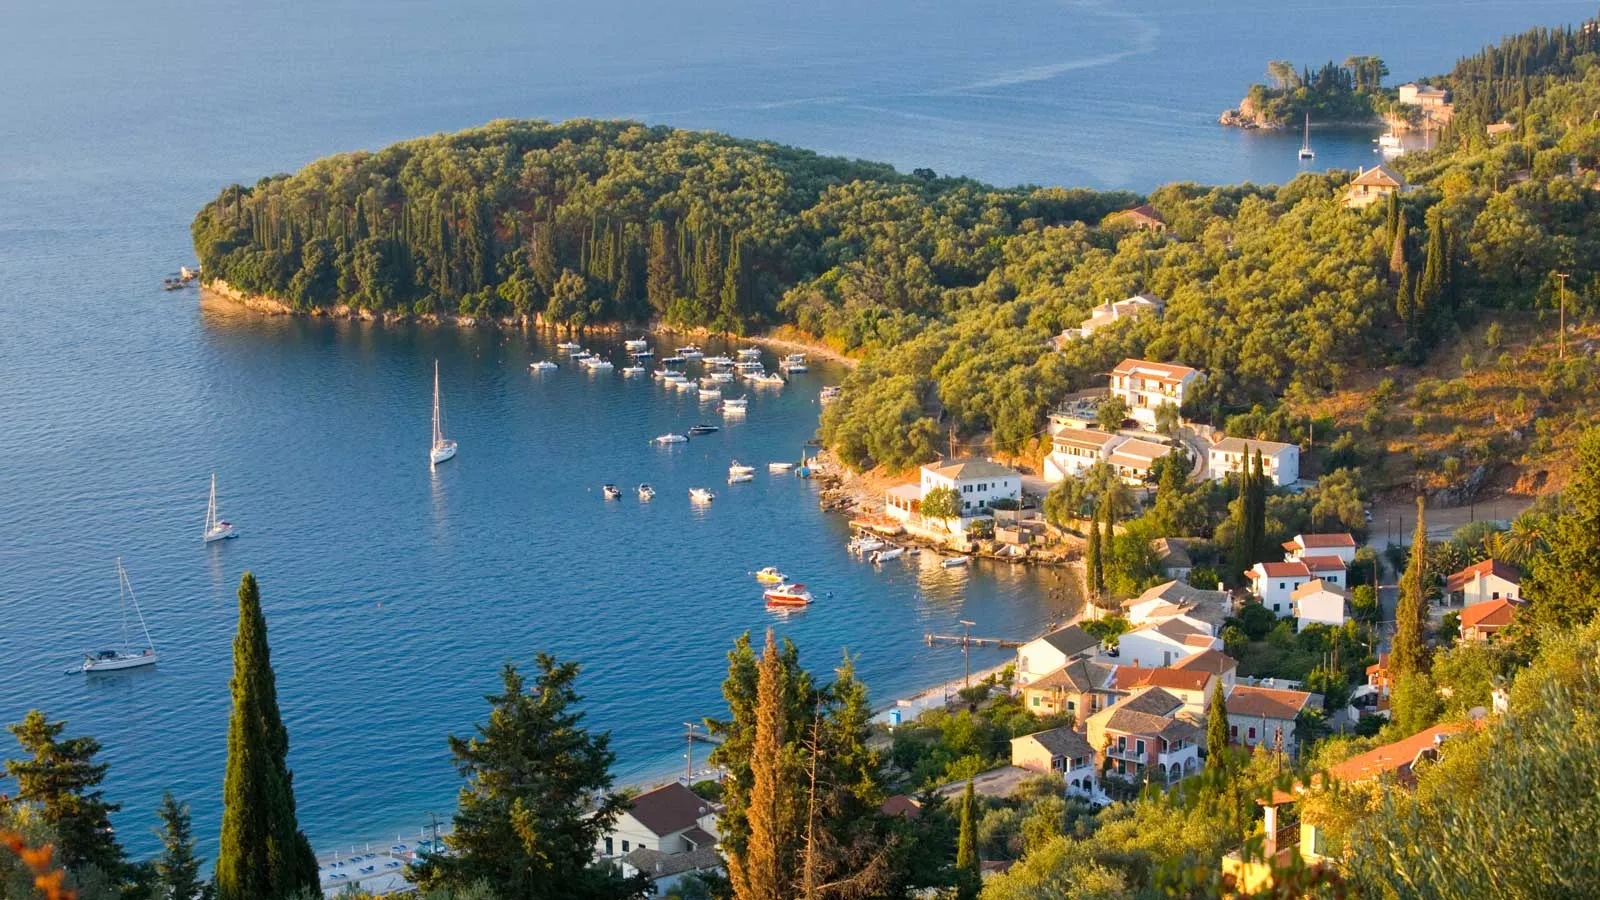 Corfu, Greece: Sun-Drenched Villas and Mediterranean Charms